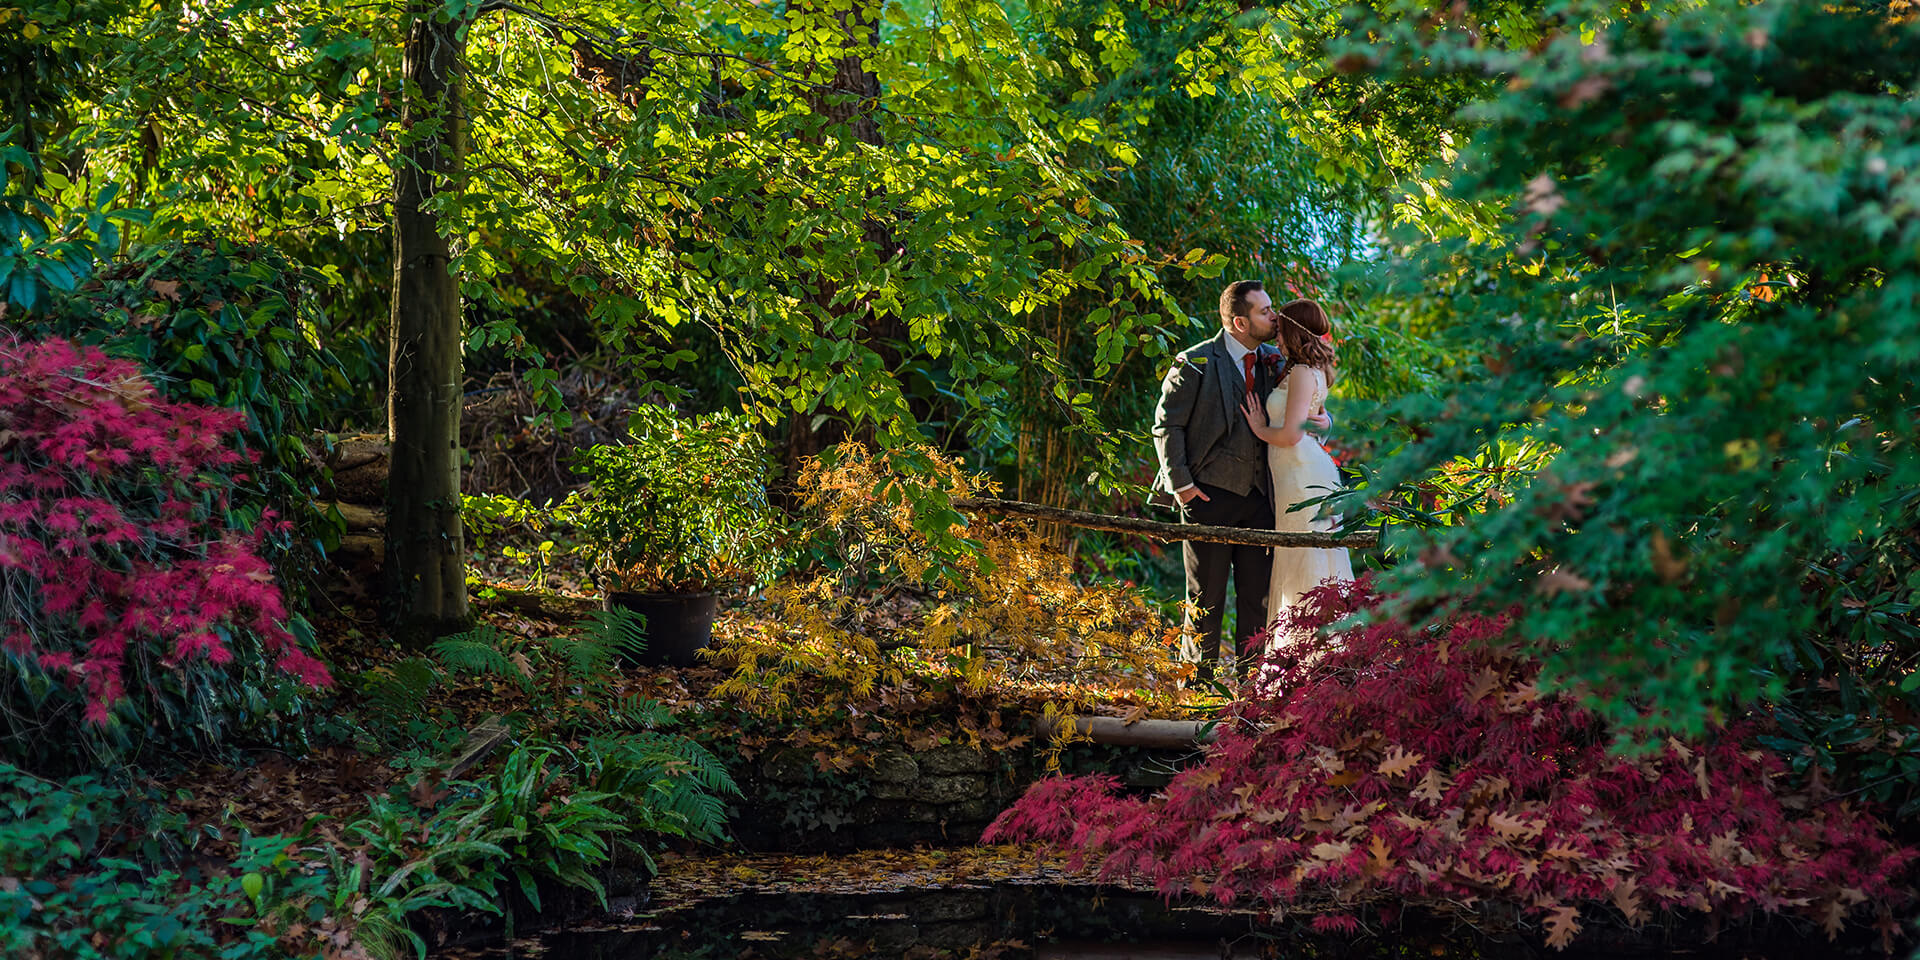 The beautiful couple shared a moment in the stunning gardens of Rivervale Barn in Hampshire